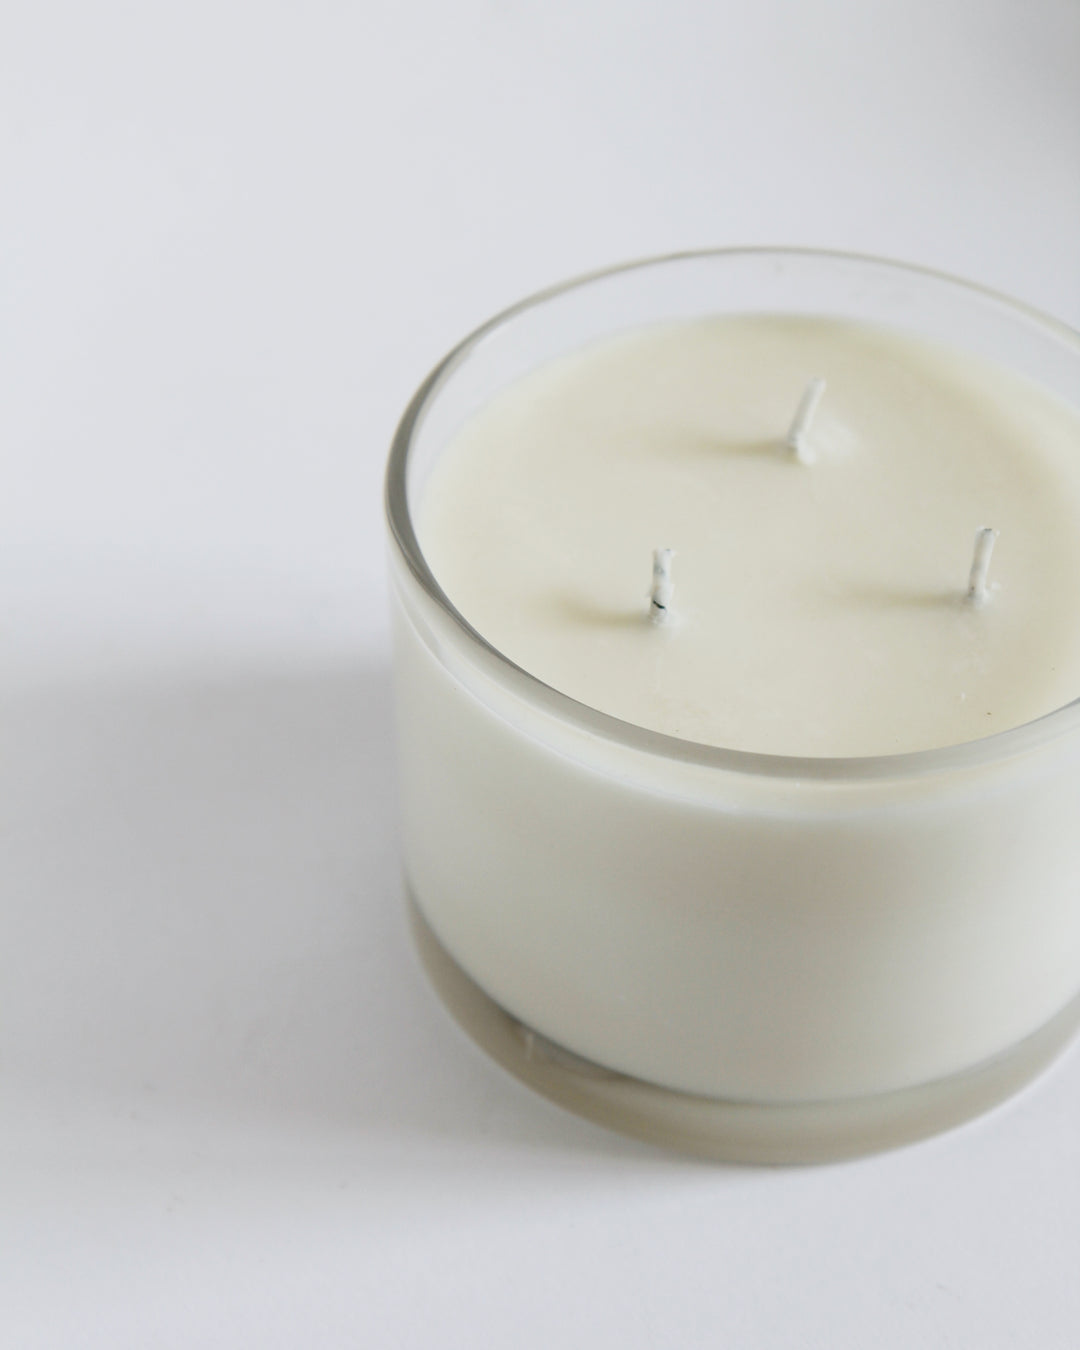 3 Wick Scented Candle - Neroli